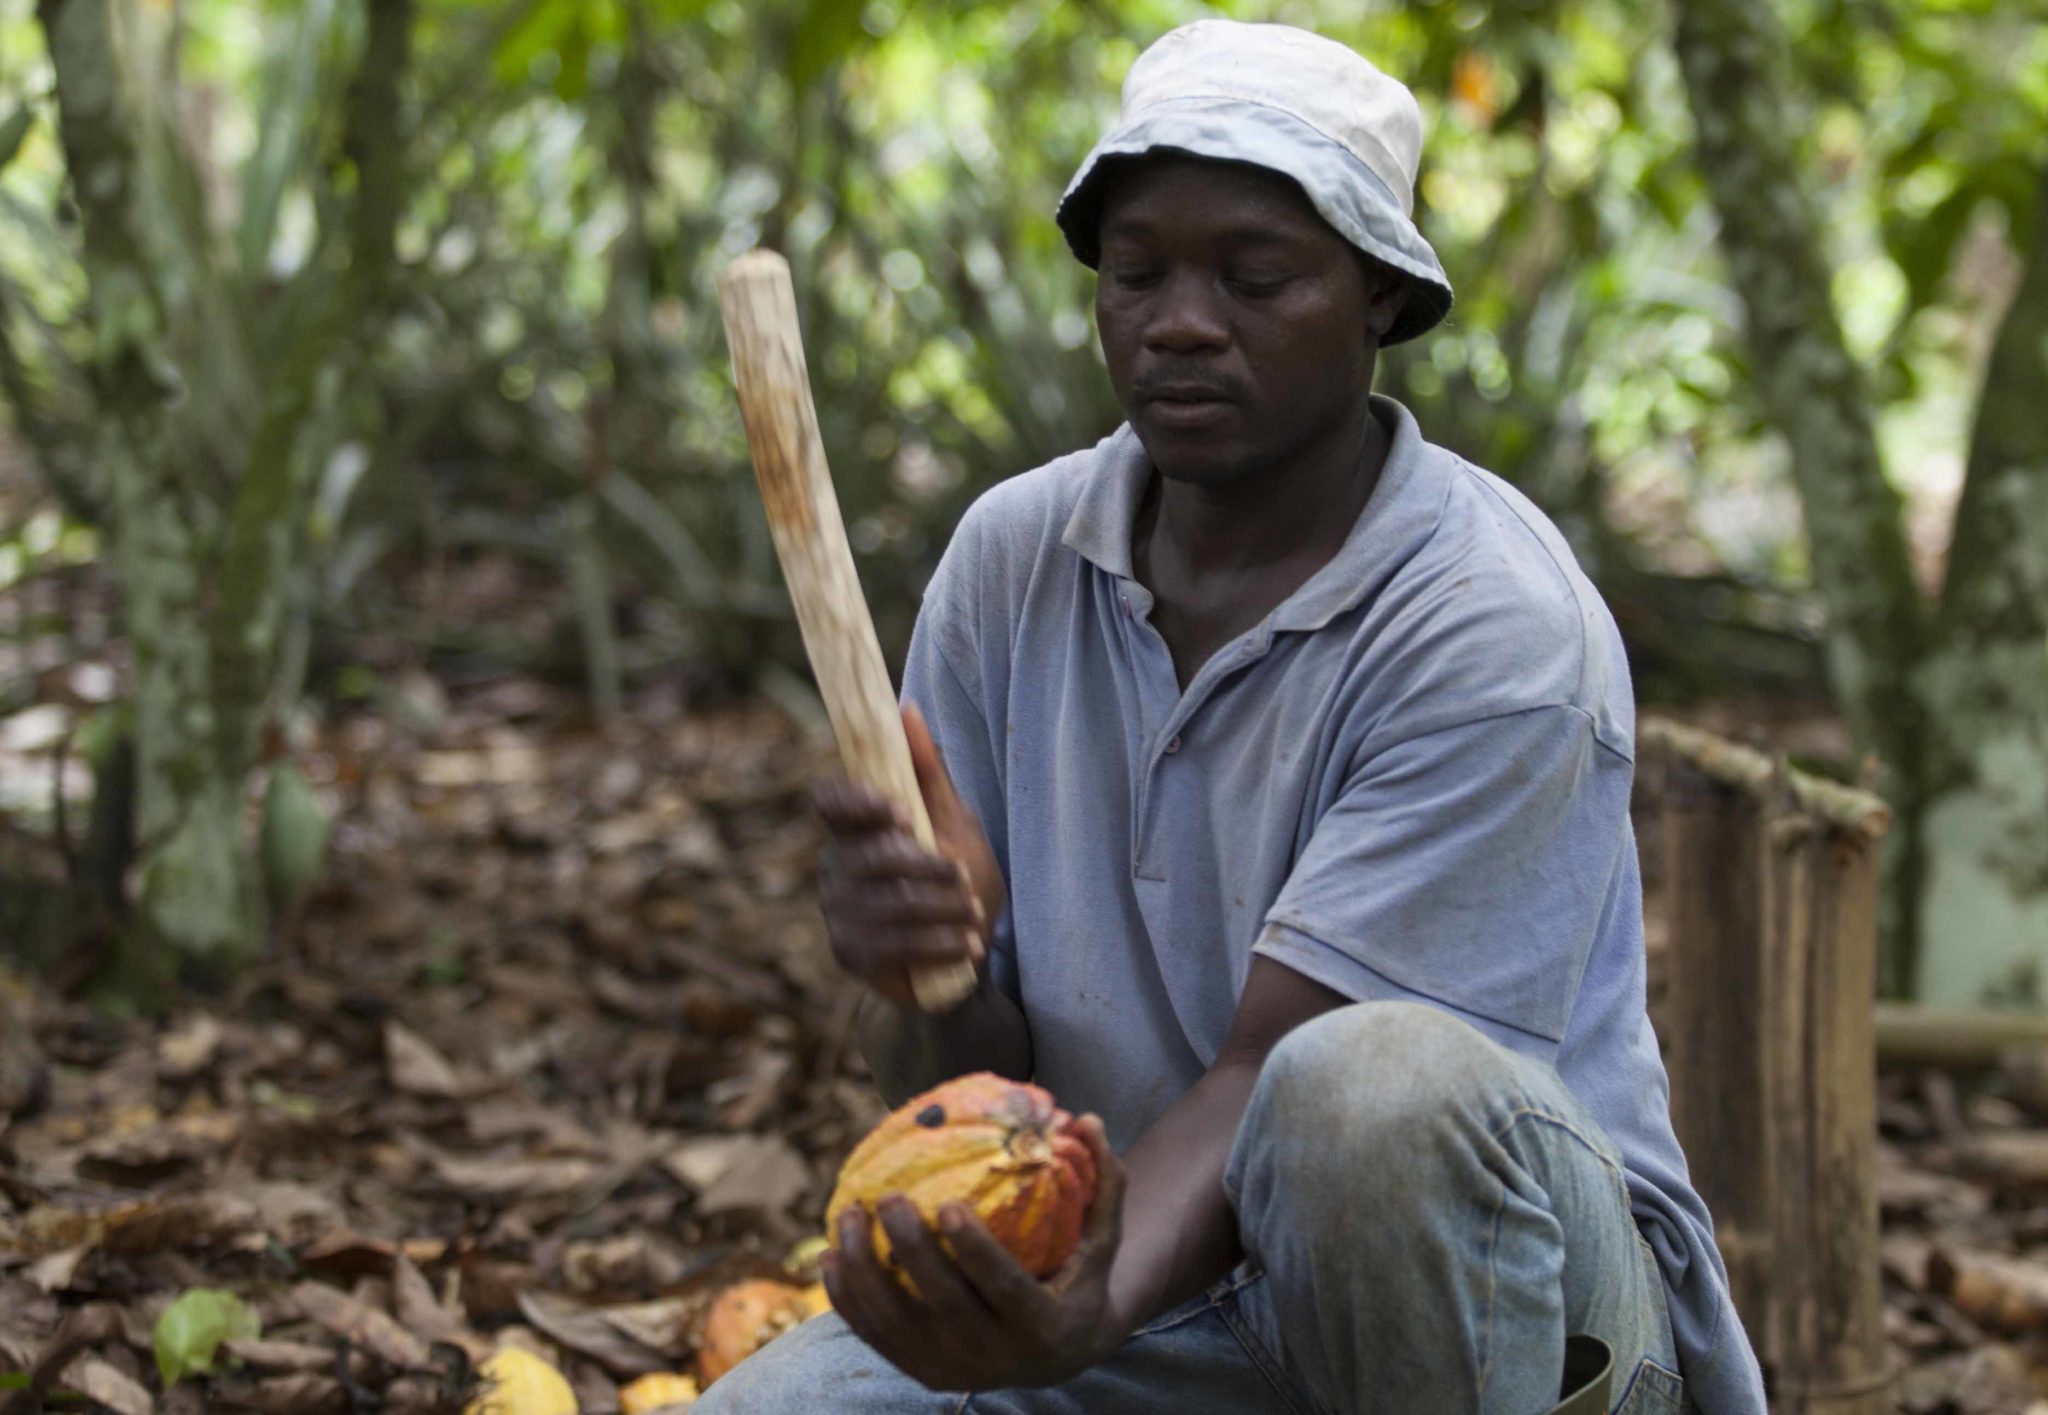 How Fairtrade and Ben & Jerry’s are working towards a living income for cocoa farmers